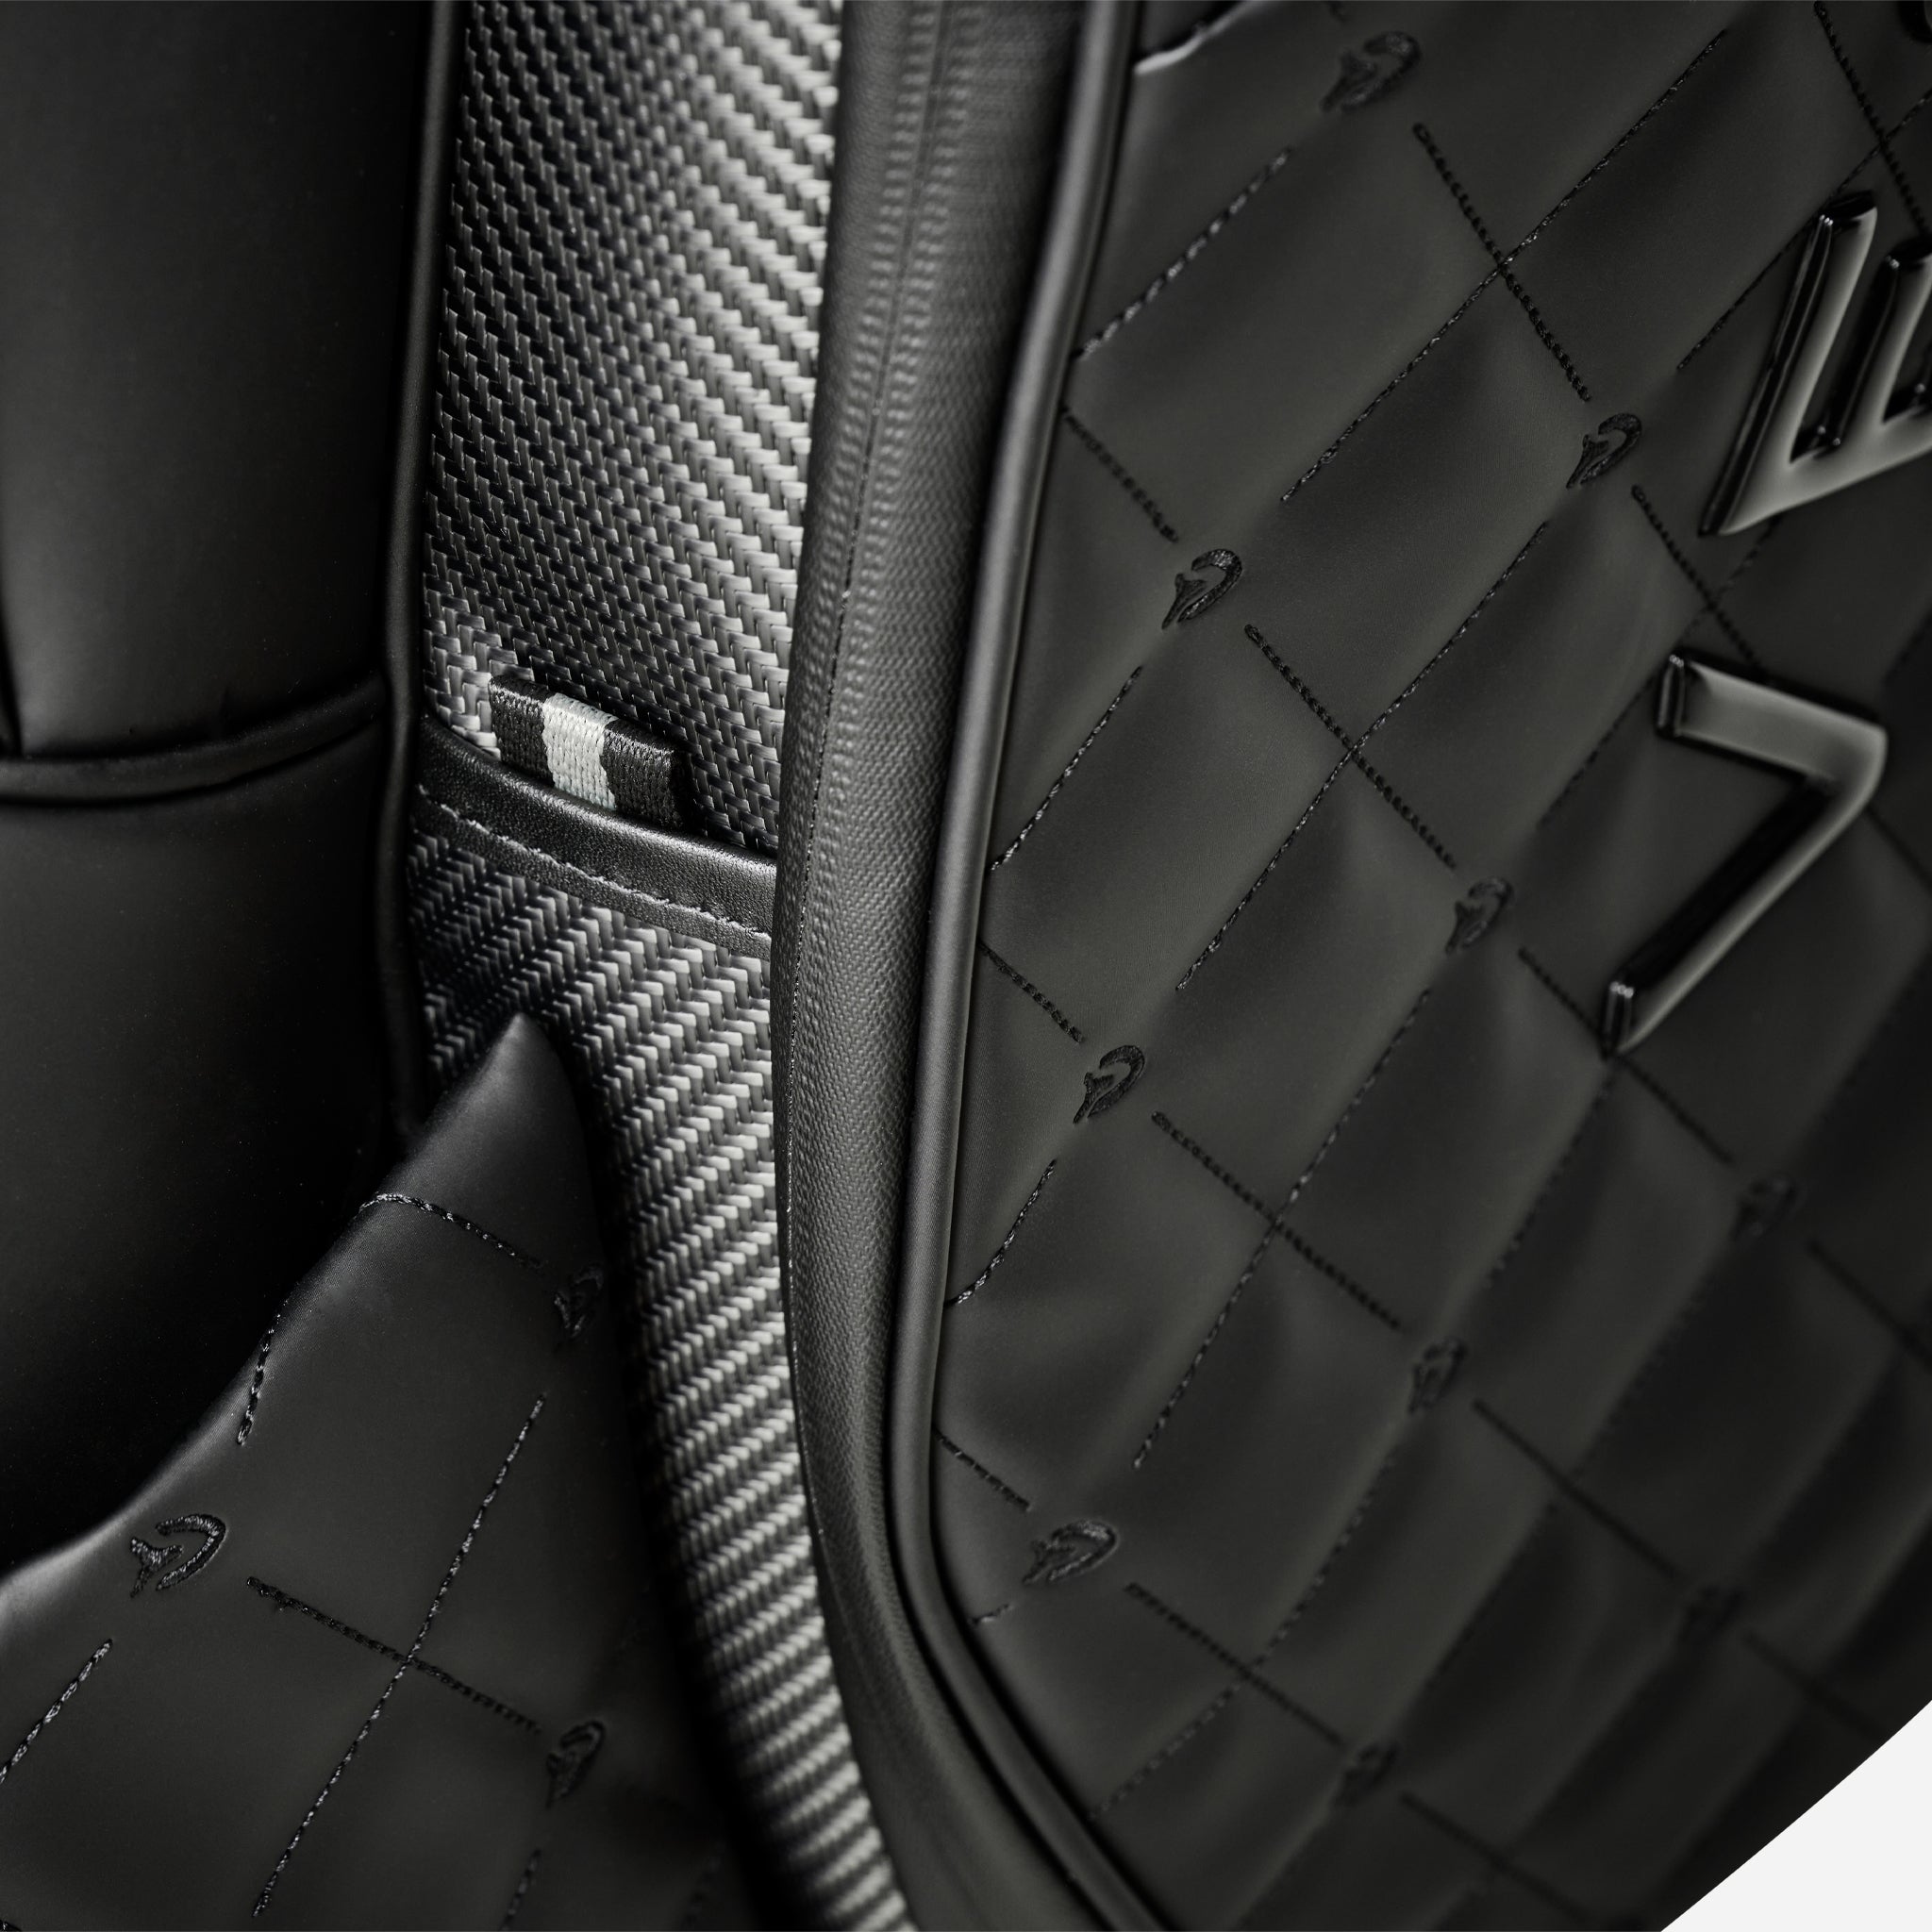 Player III Carbon Black, Limited Edition Golf Bag